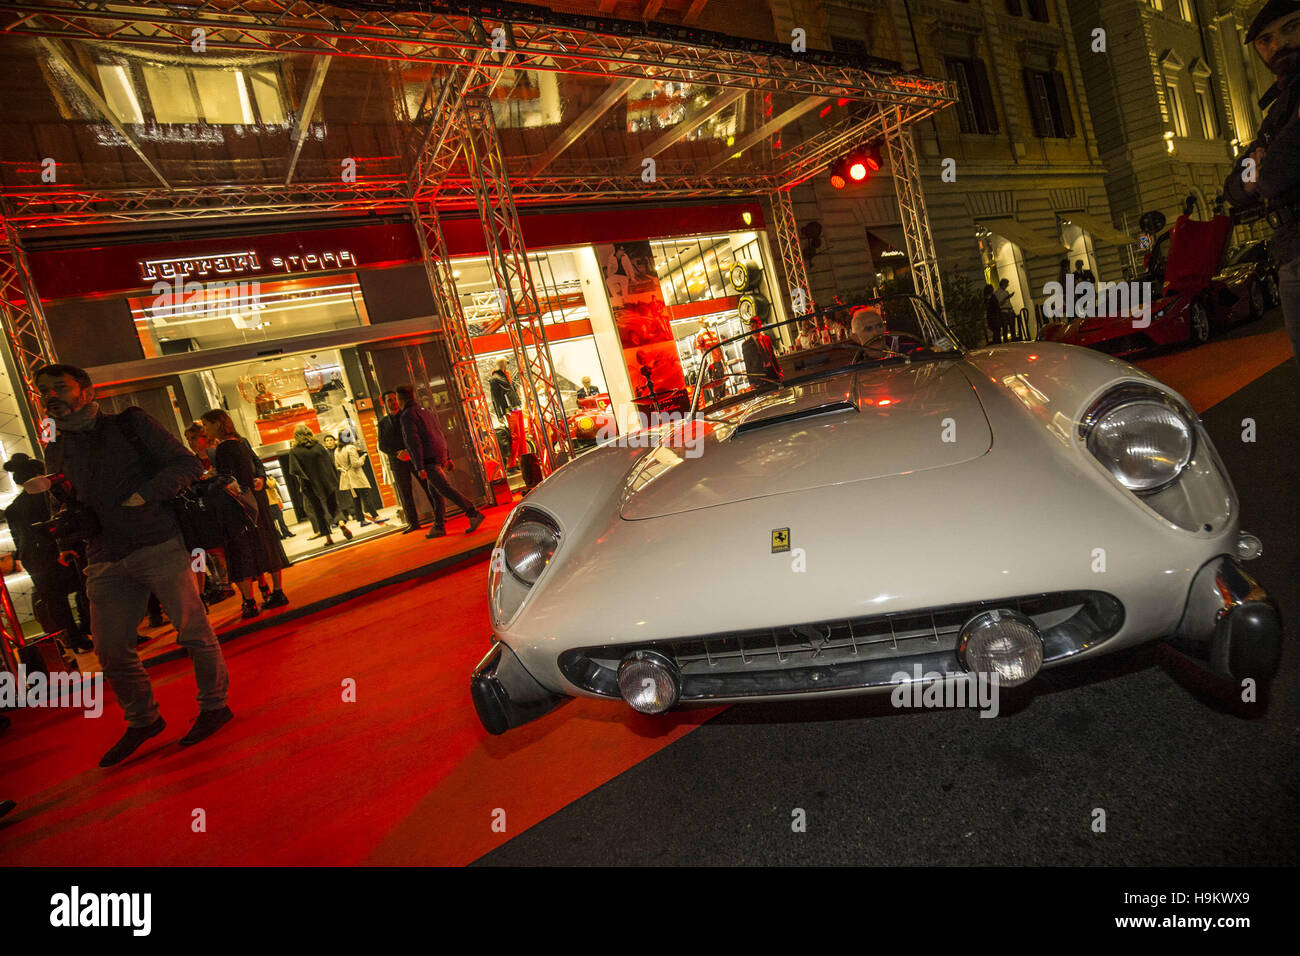 The Ferrari Store reopening on Via Tomacelli in Rome, Italy, after a total makeover.  Where: Rome, Lazio, Italy When: 21 Oct 2016 Credit: IPA/WENN.com  **Only available for publication in UK, USA, Germany, Austria, Switzerland** Stock Photo